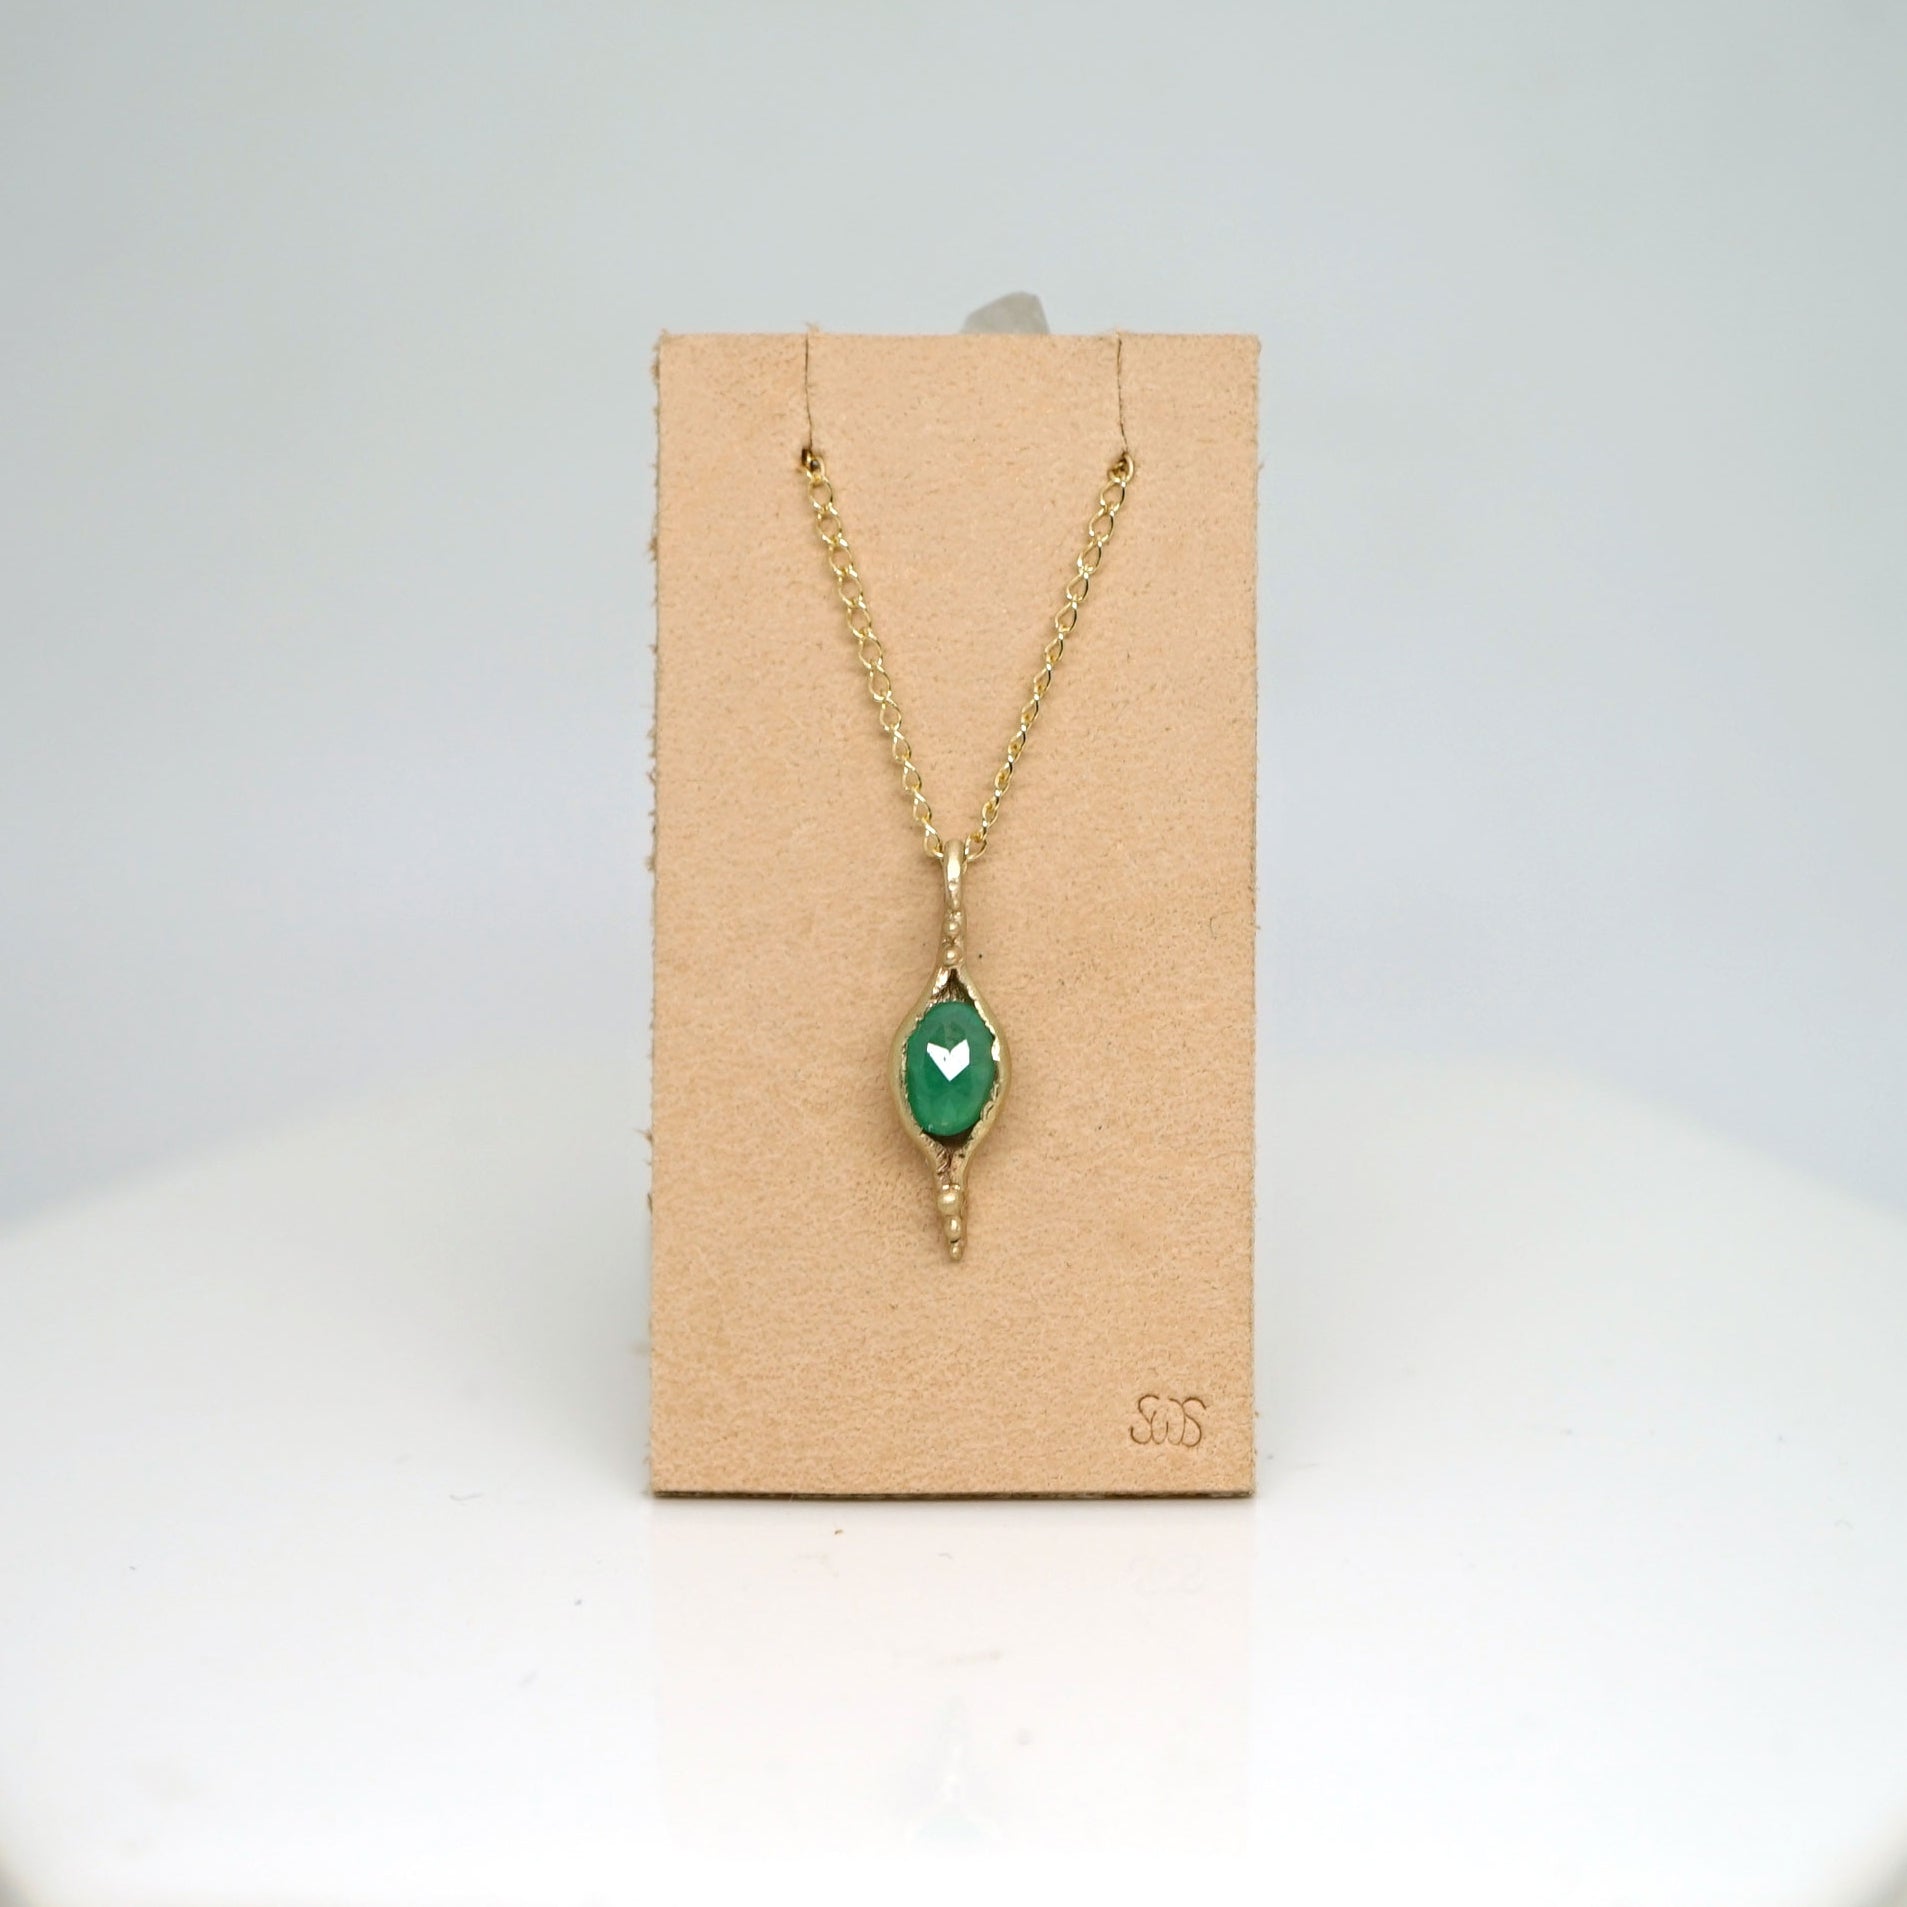 Pod pendant necklace with emerald